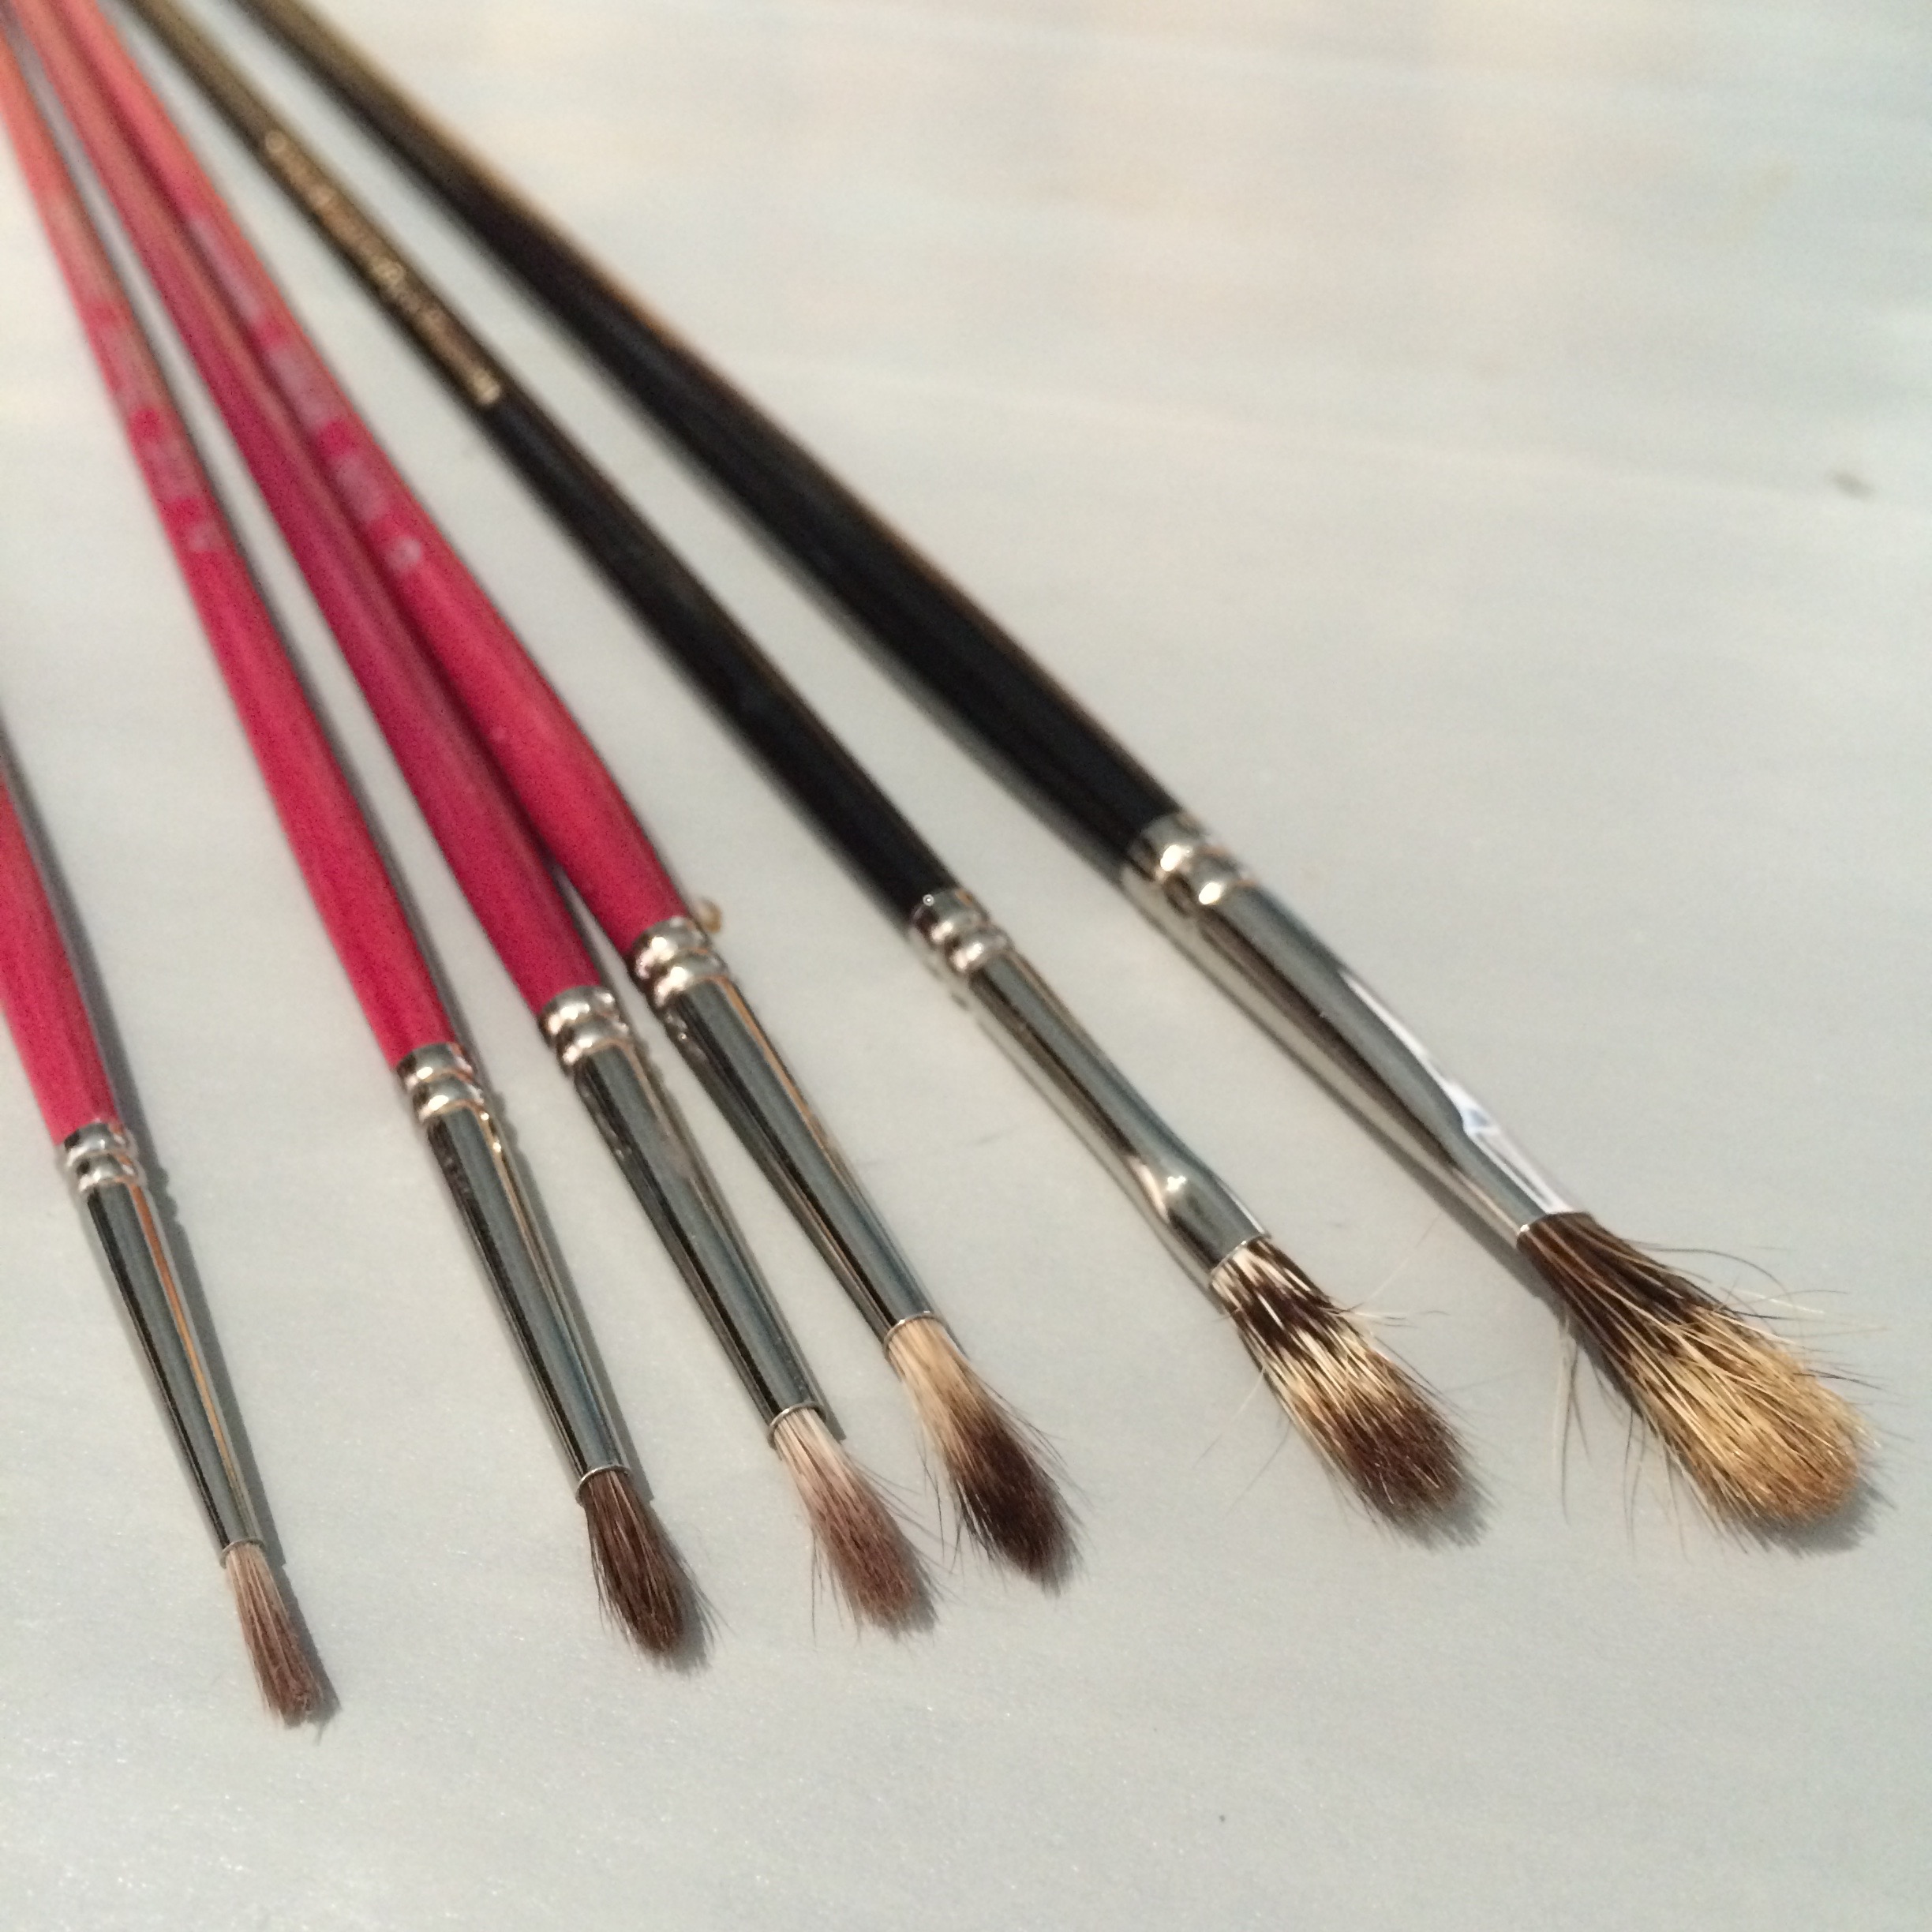 Rosemary & Co : Oil And Acrylic Brush Set Of 10